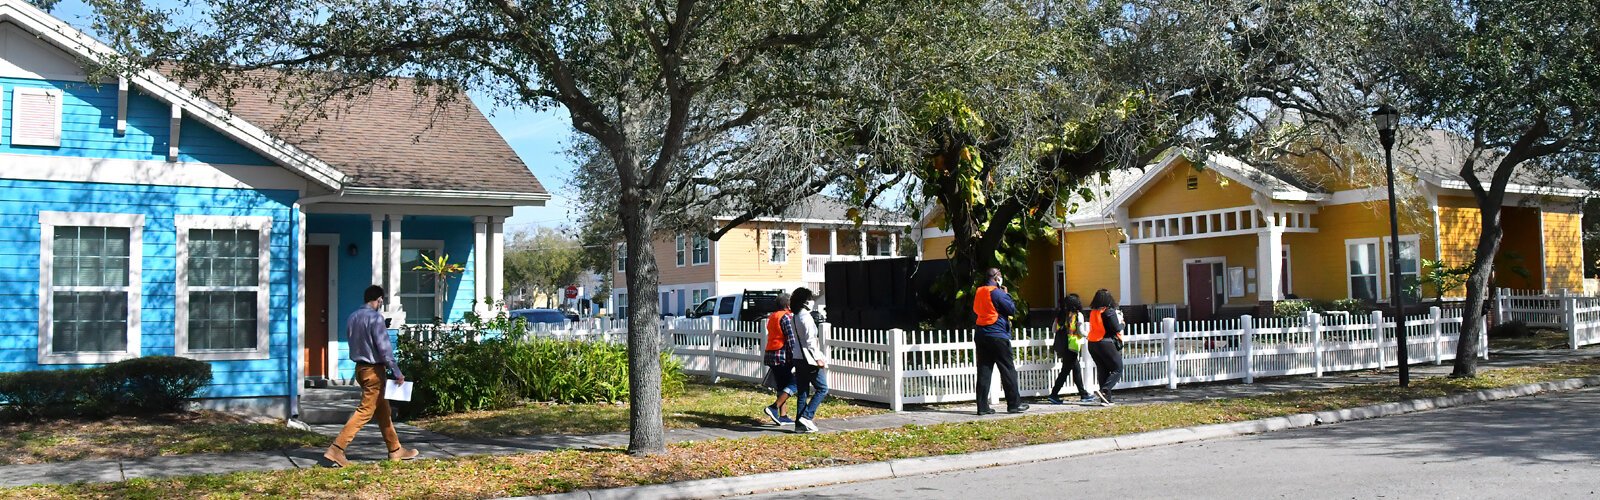 The walking tour moves past colorful houses that brighten the streets of the College Hill/Belmont Heights neighborhood.